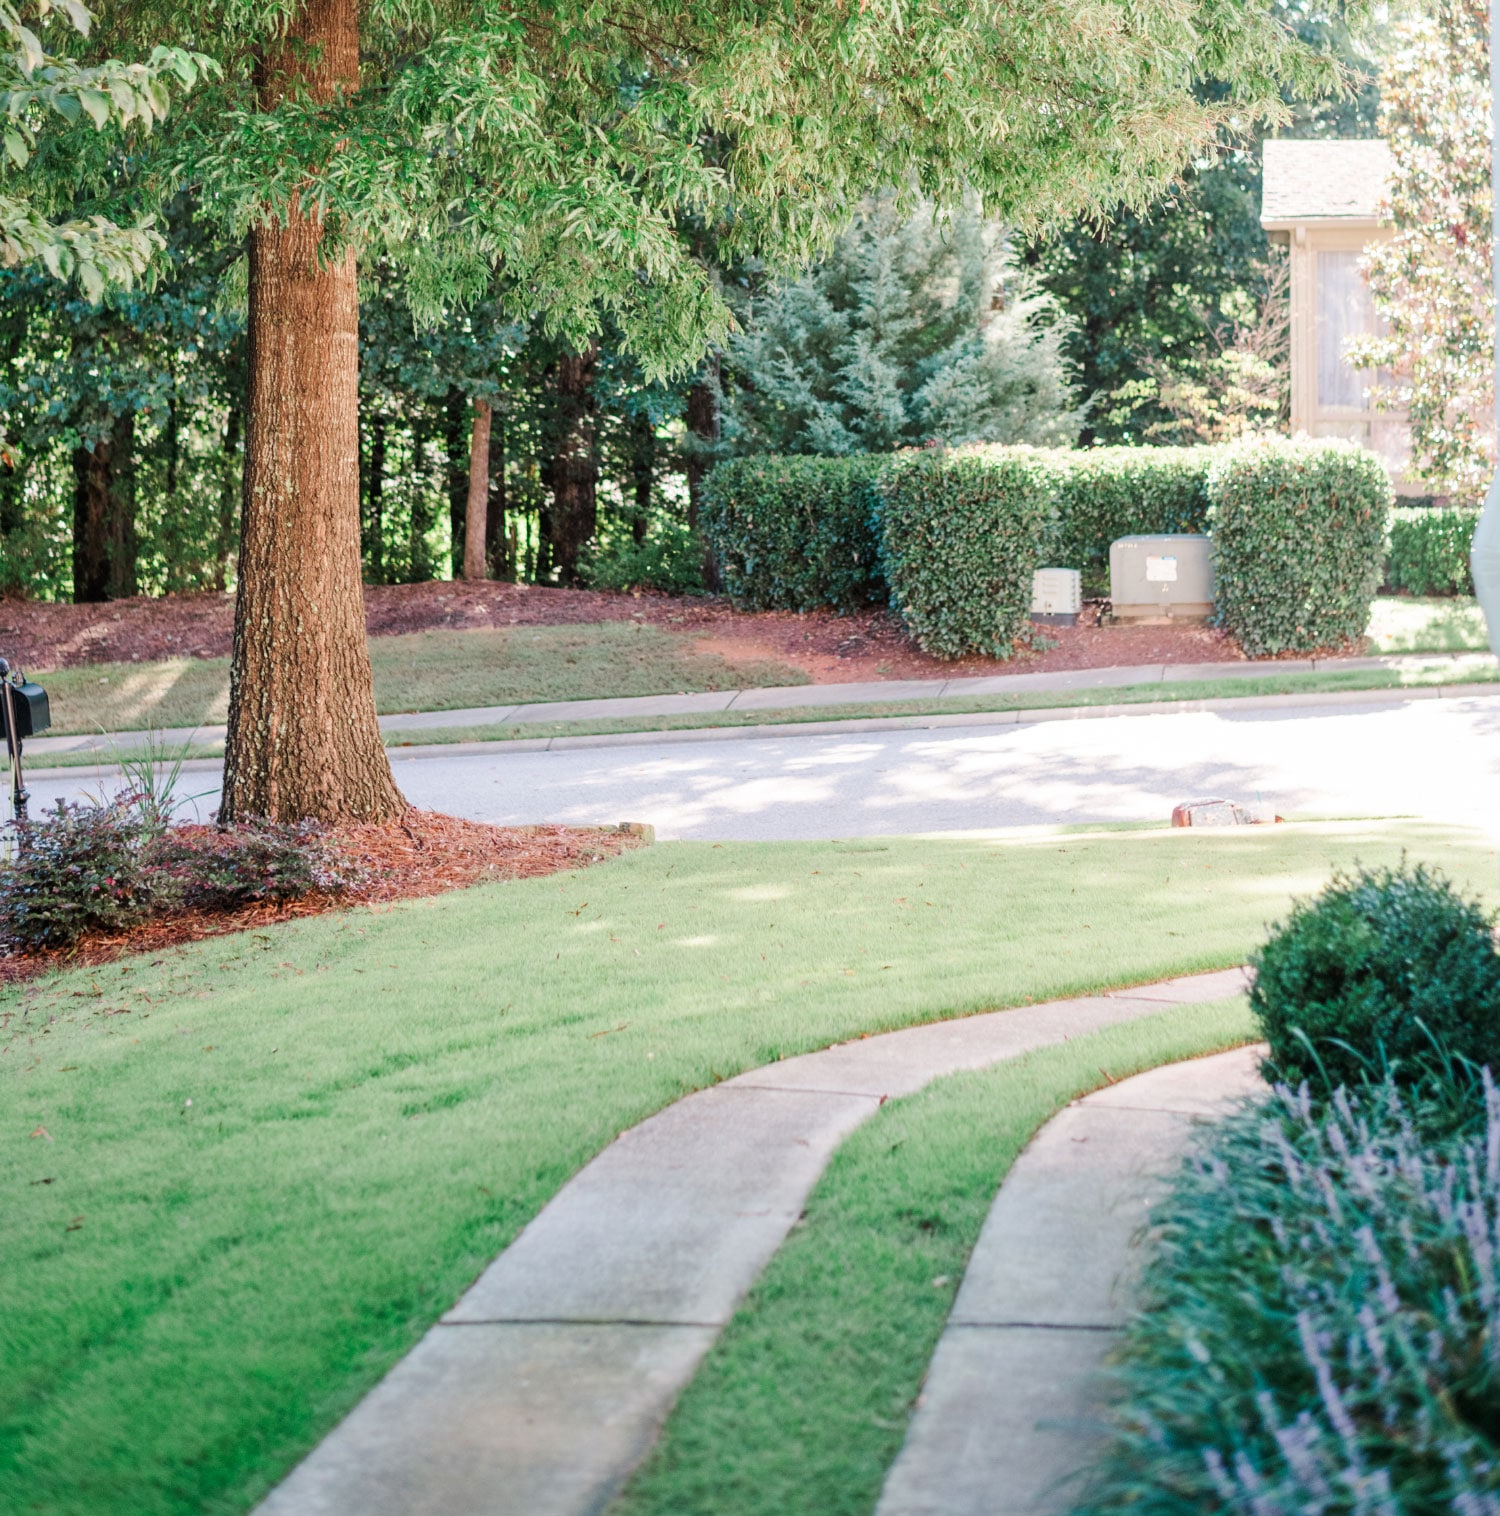 Trees and Turfgrass: Can They Live In Harmony?